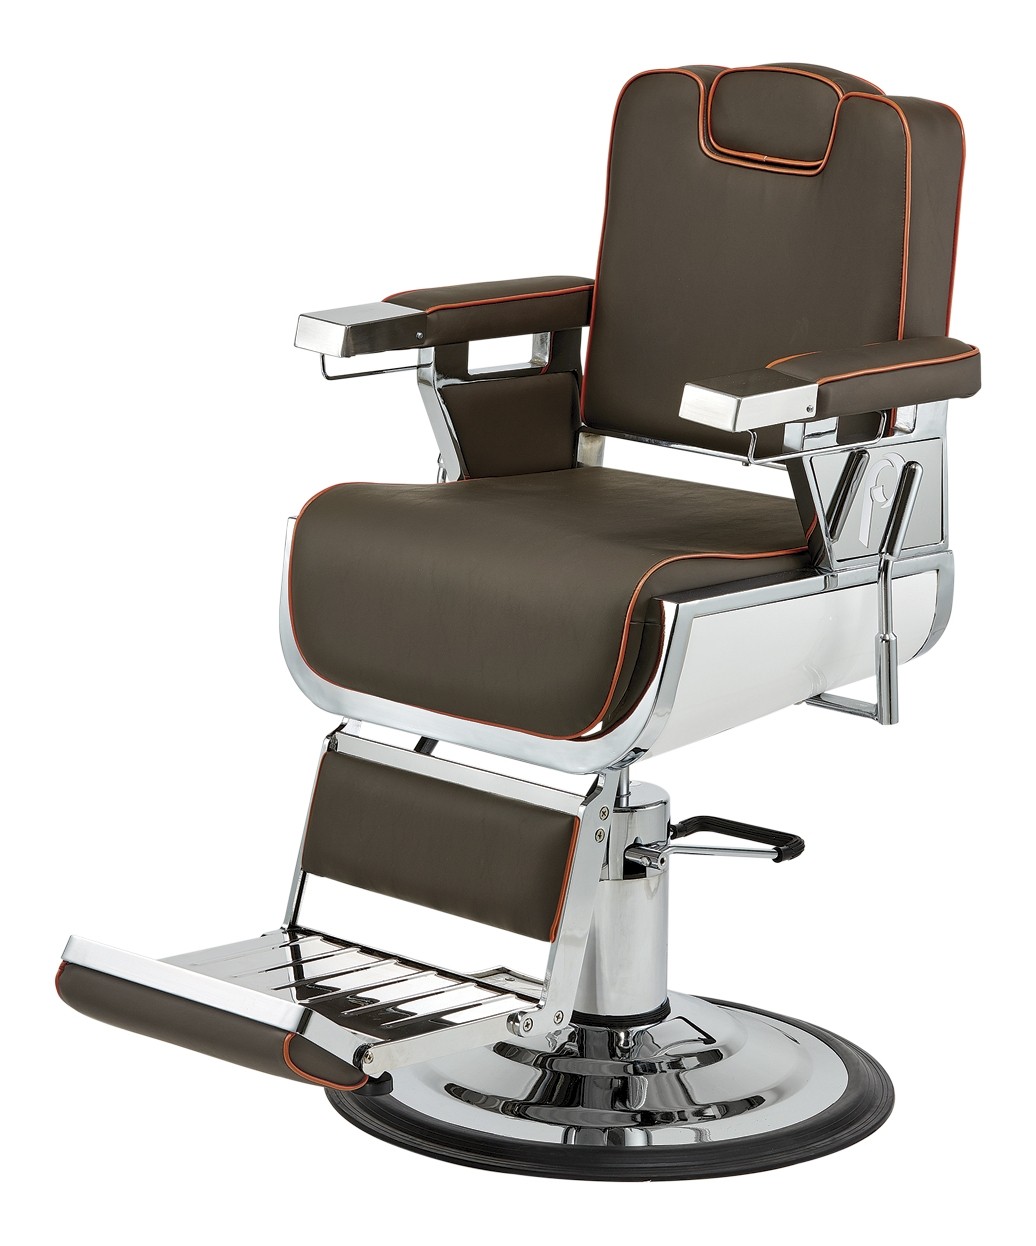 Best Barber Chairs The Top 13 Barbershop Chairs In 2019 Buy